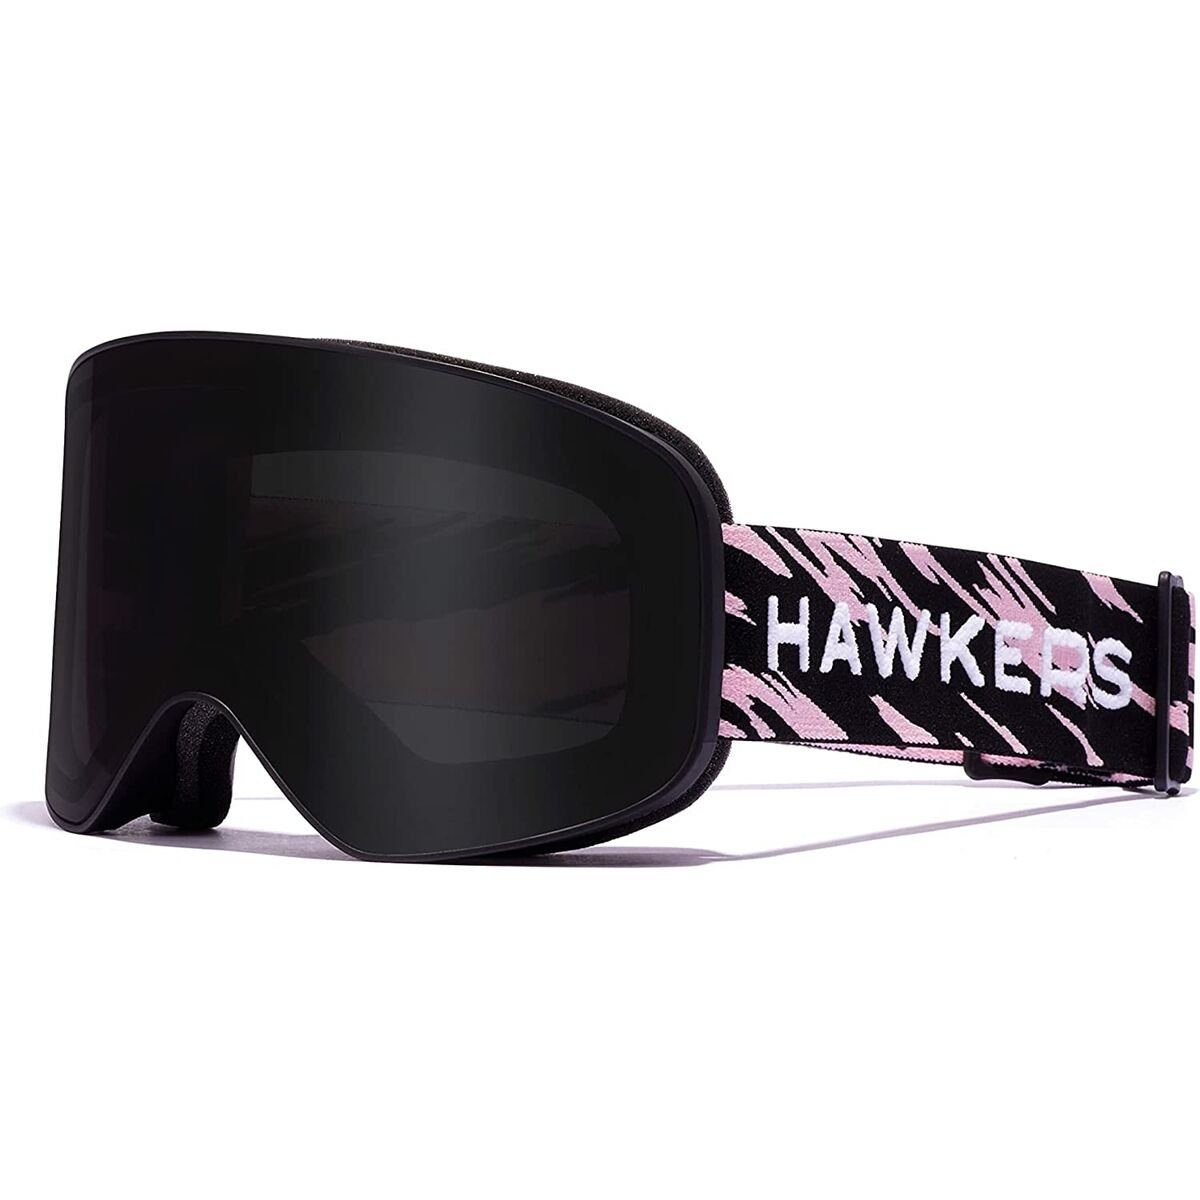 Hawkers Skibrille